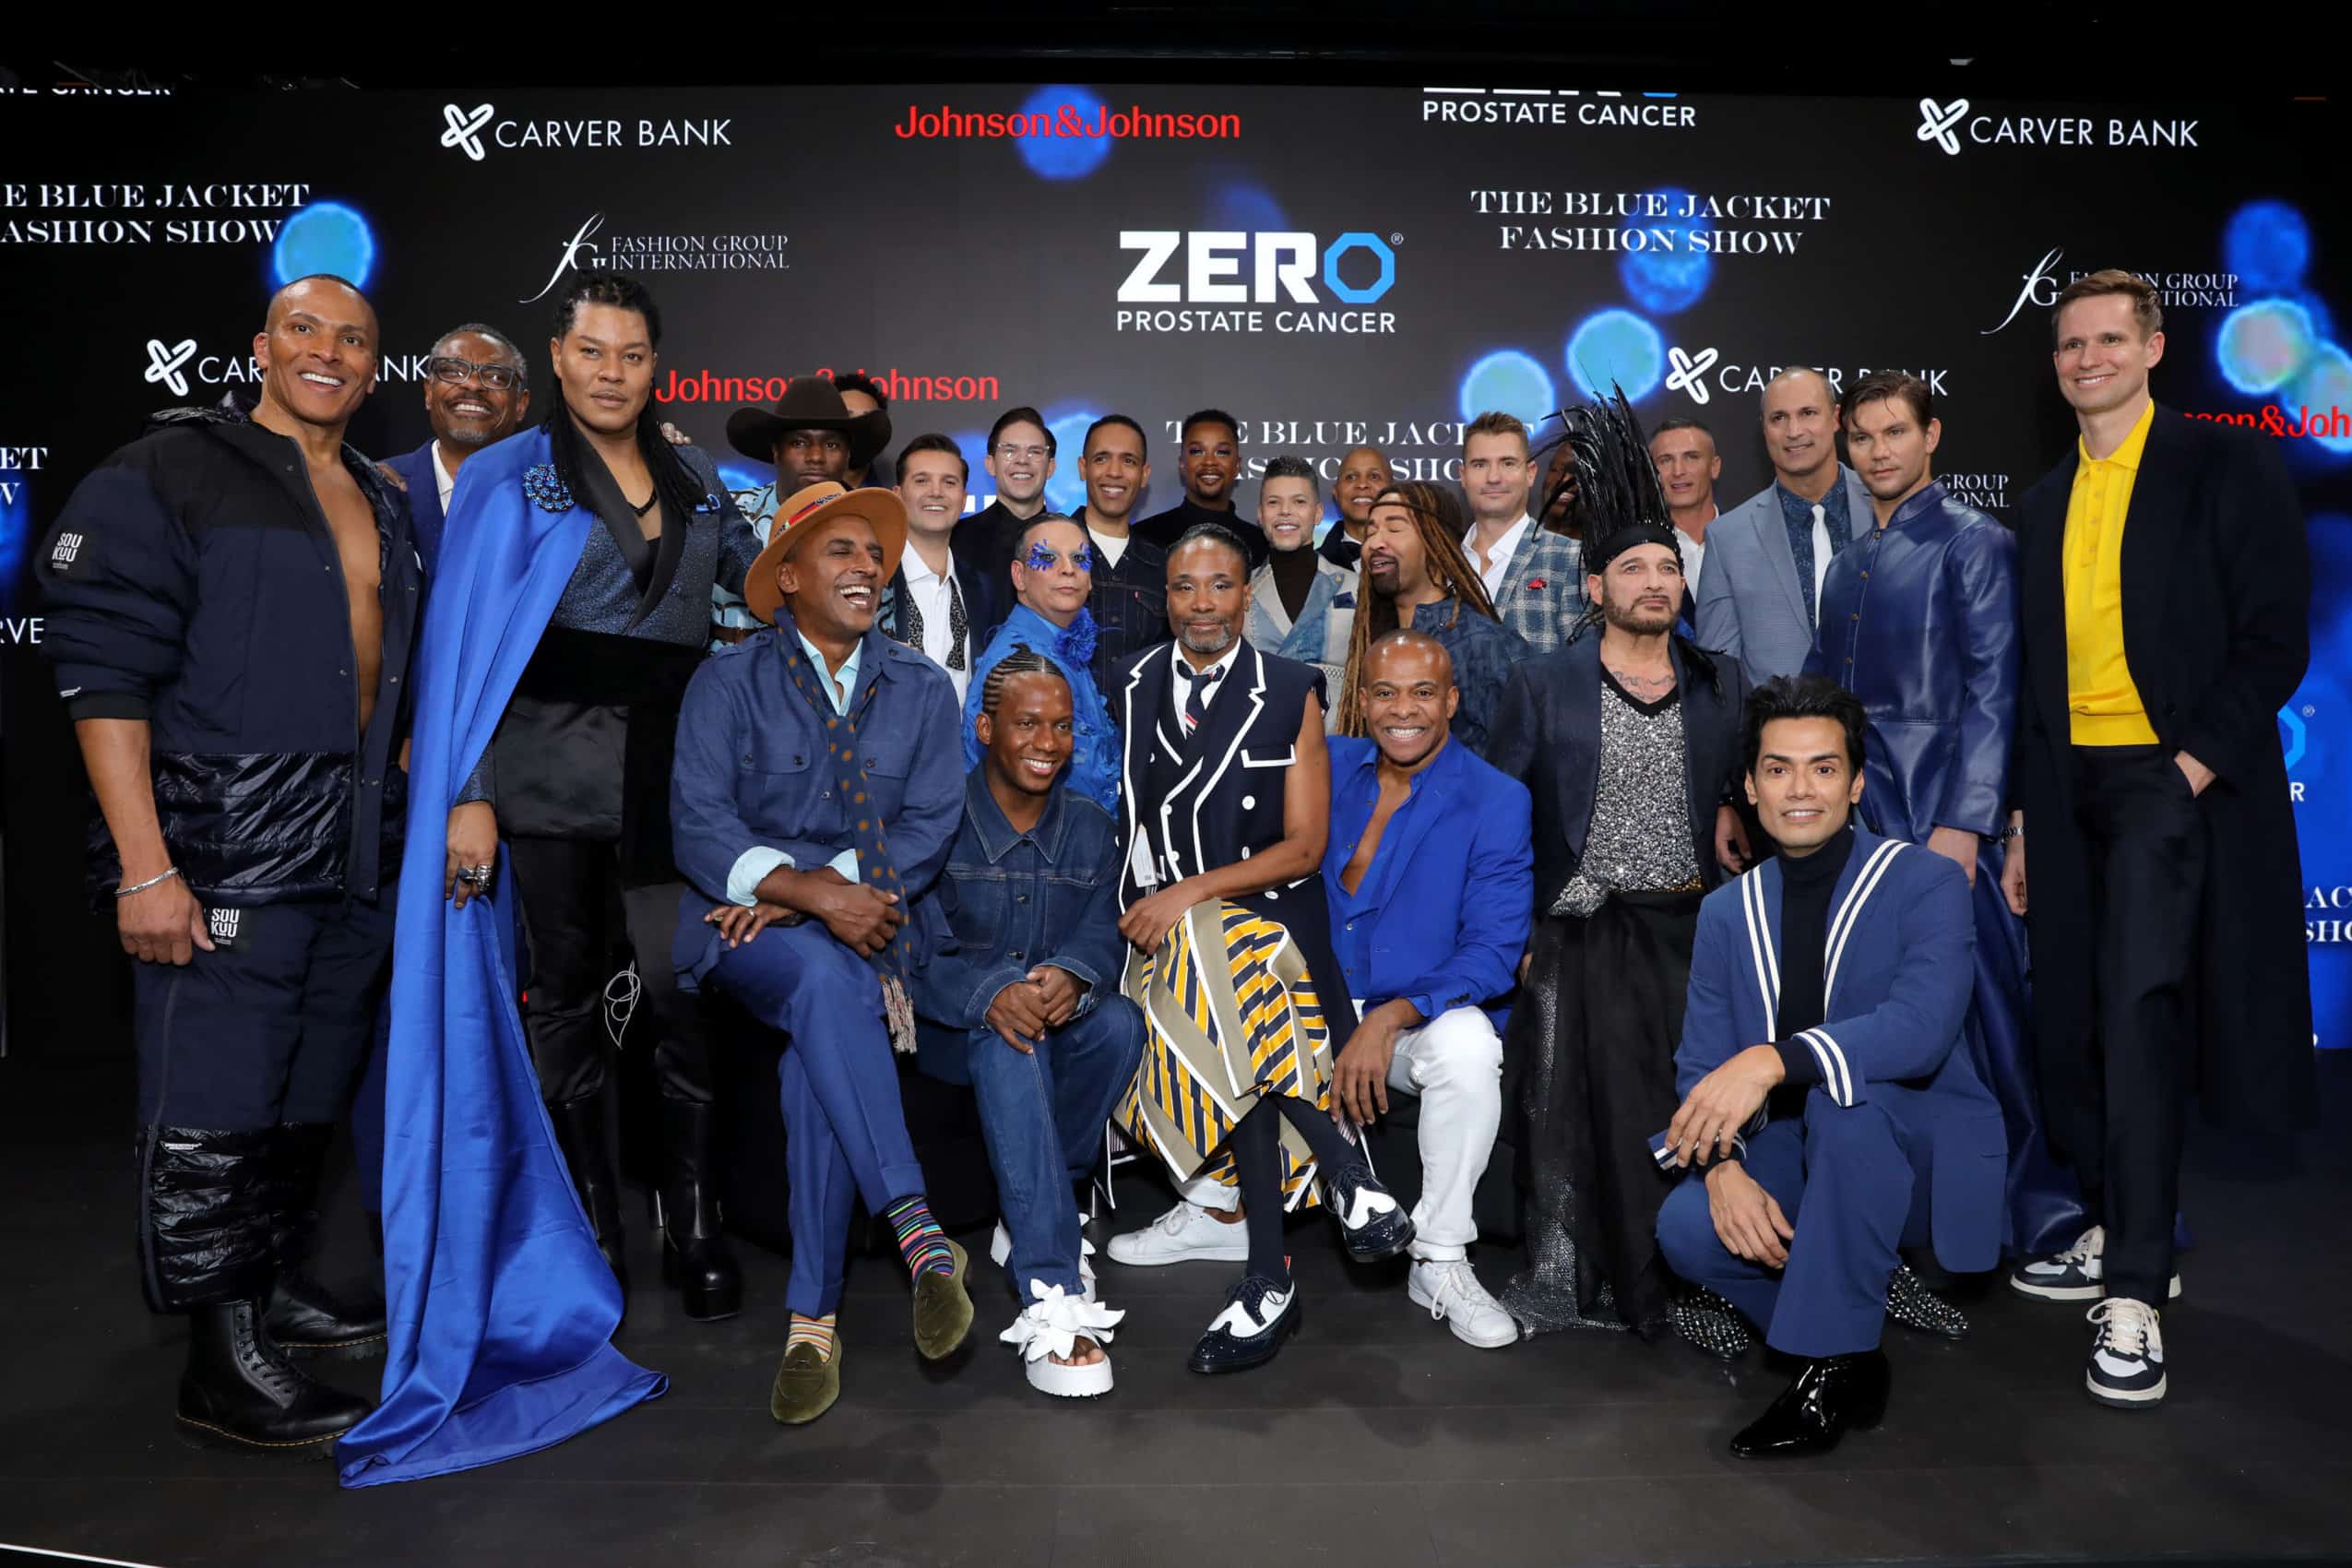 The Blue Jacket Fashion Show Featured An All-Star Cast